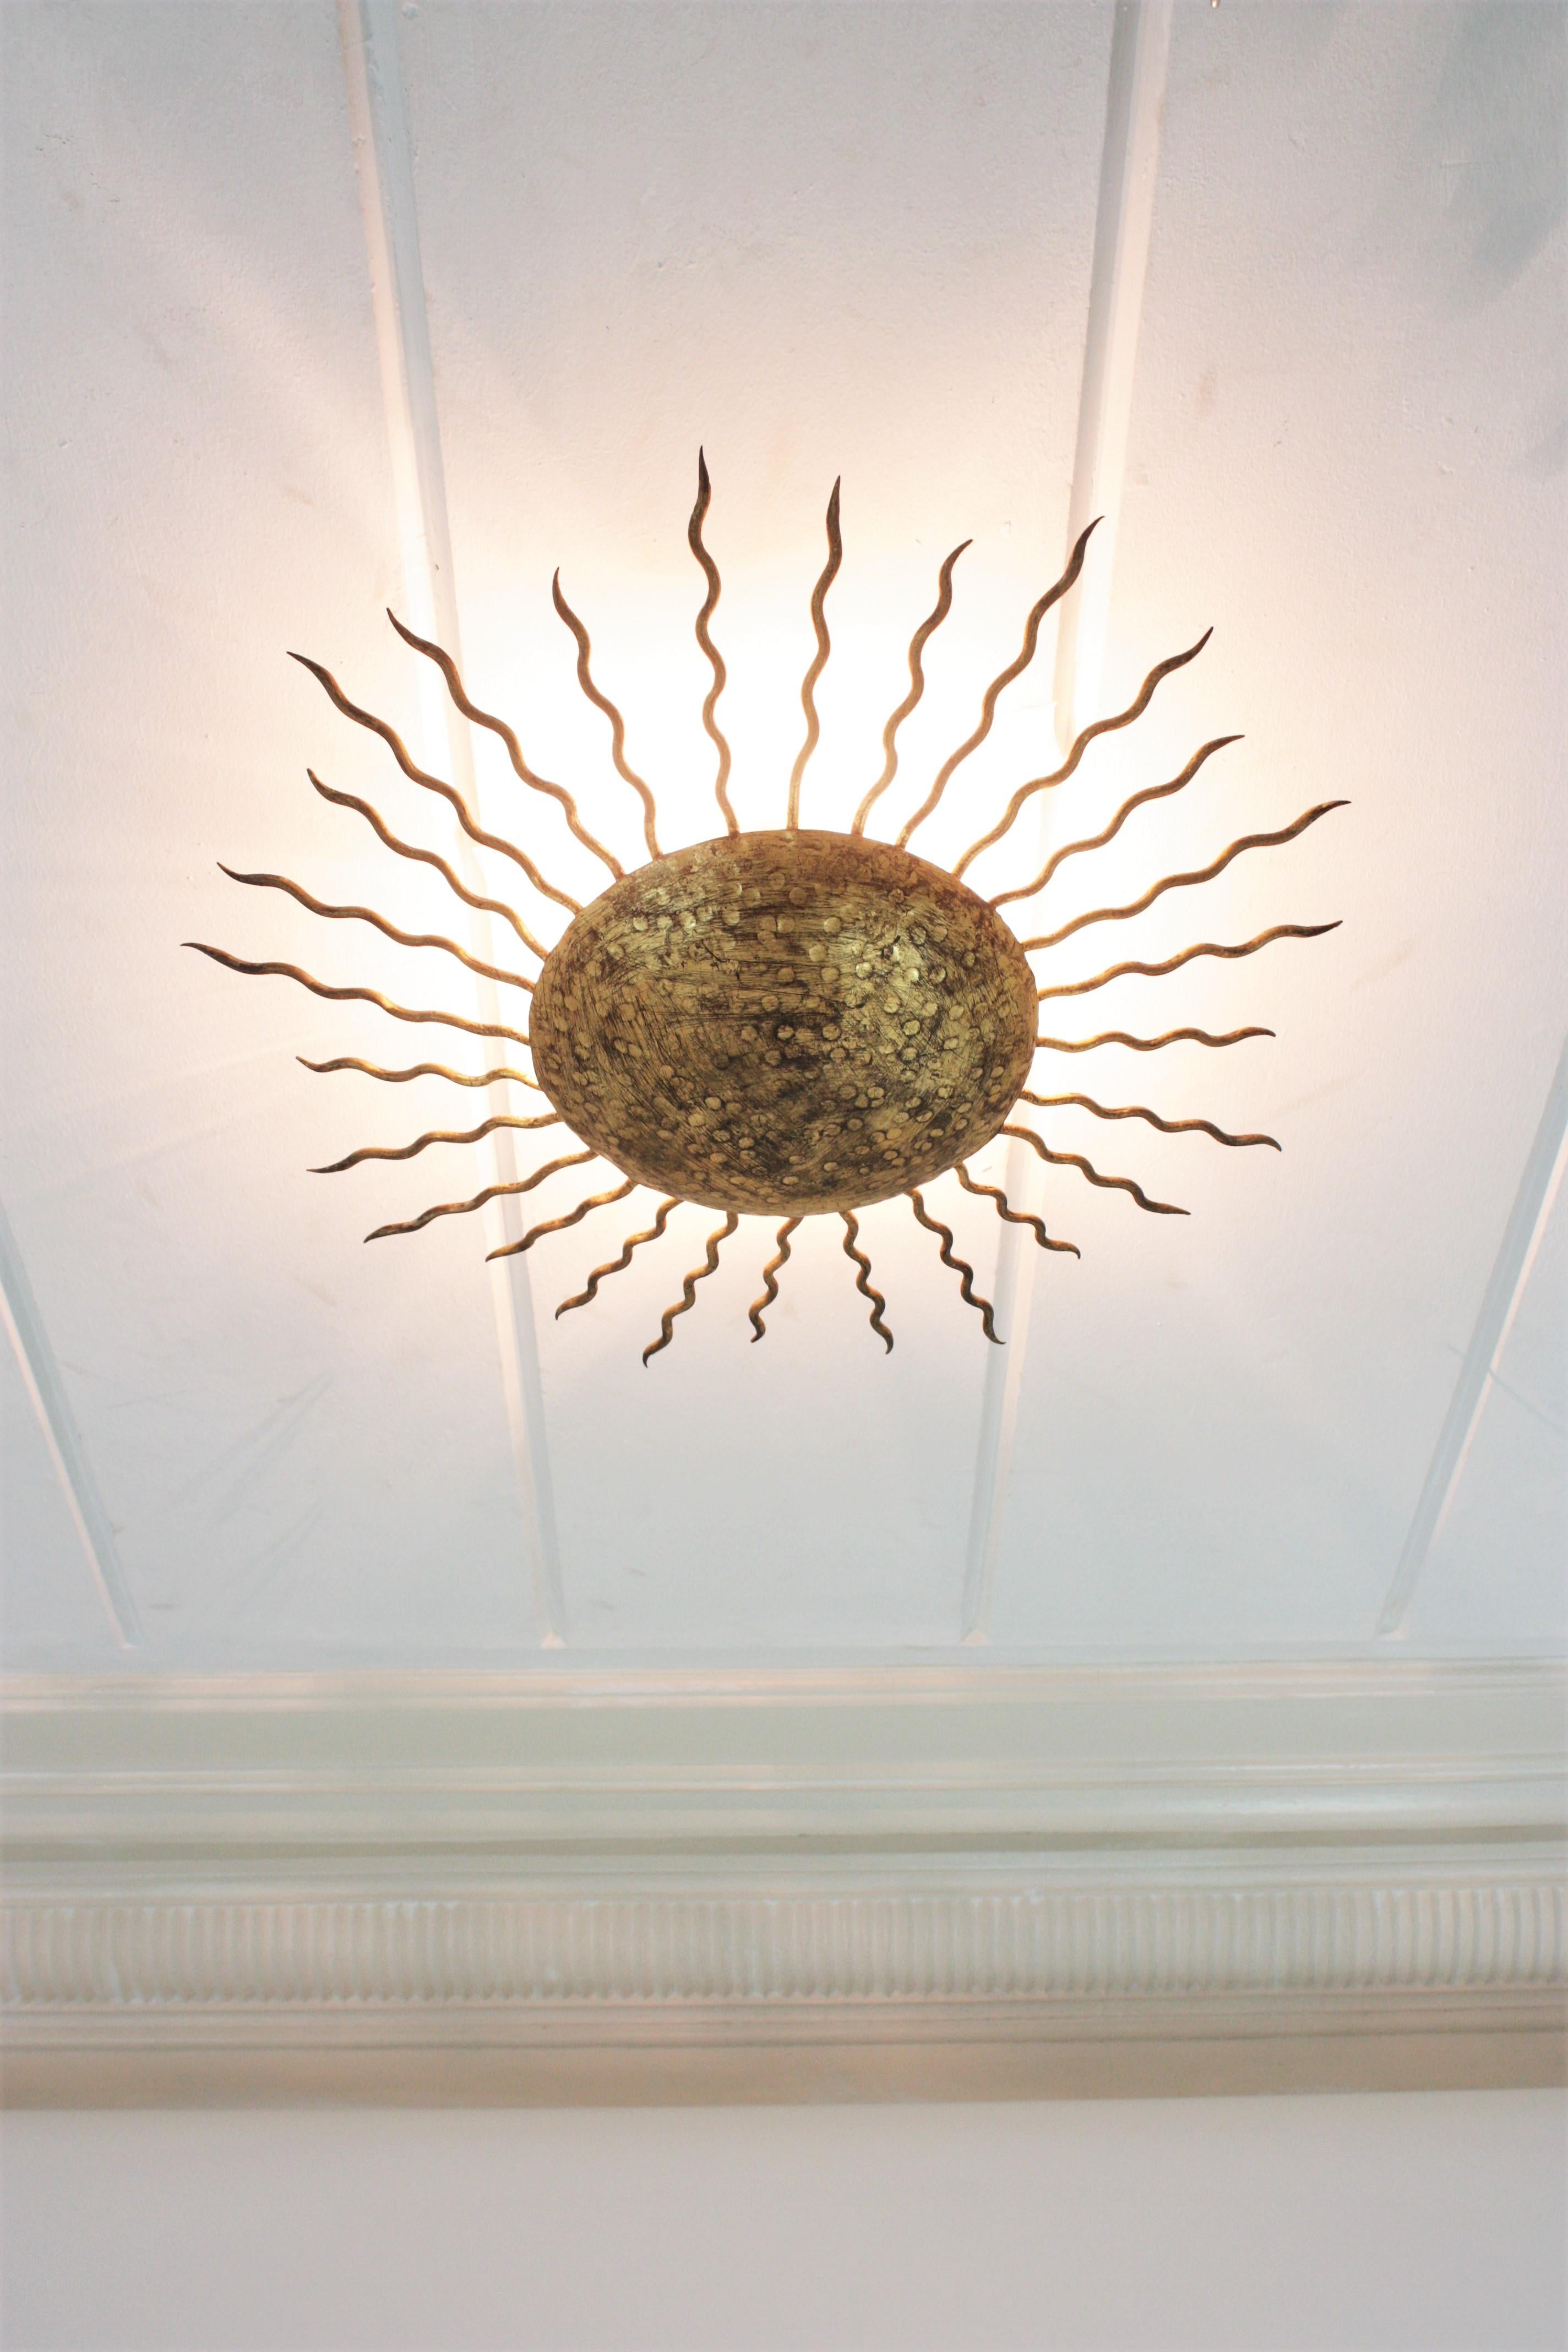 Large Sunburst Ceiling Light Fixture in Hand Hammered Gilt Iron, 1950s For Sale 3